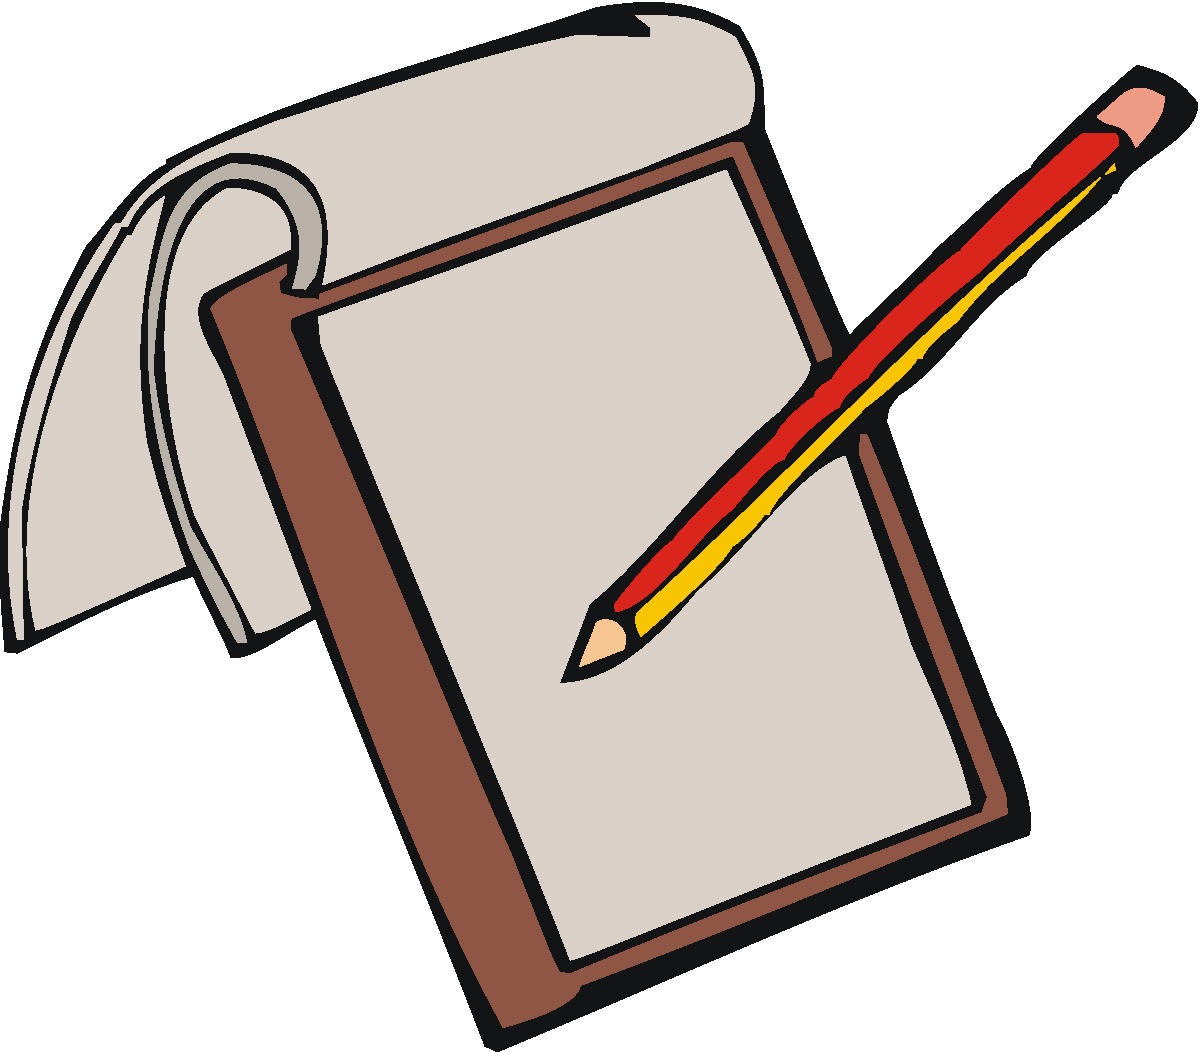 Writing paper and pencil clipart clipart kid